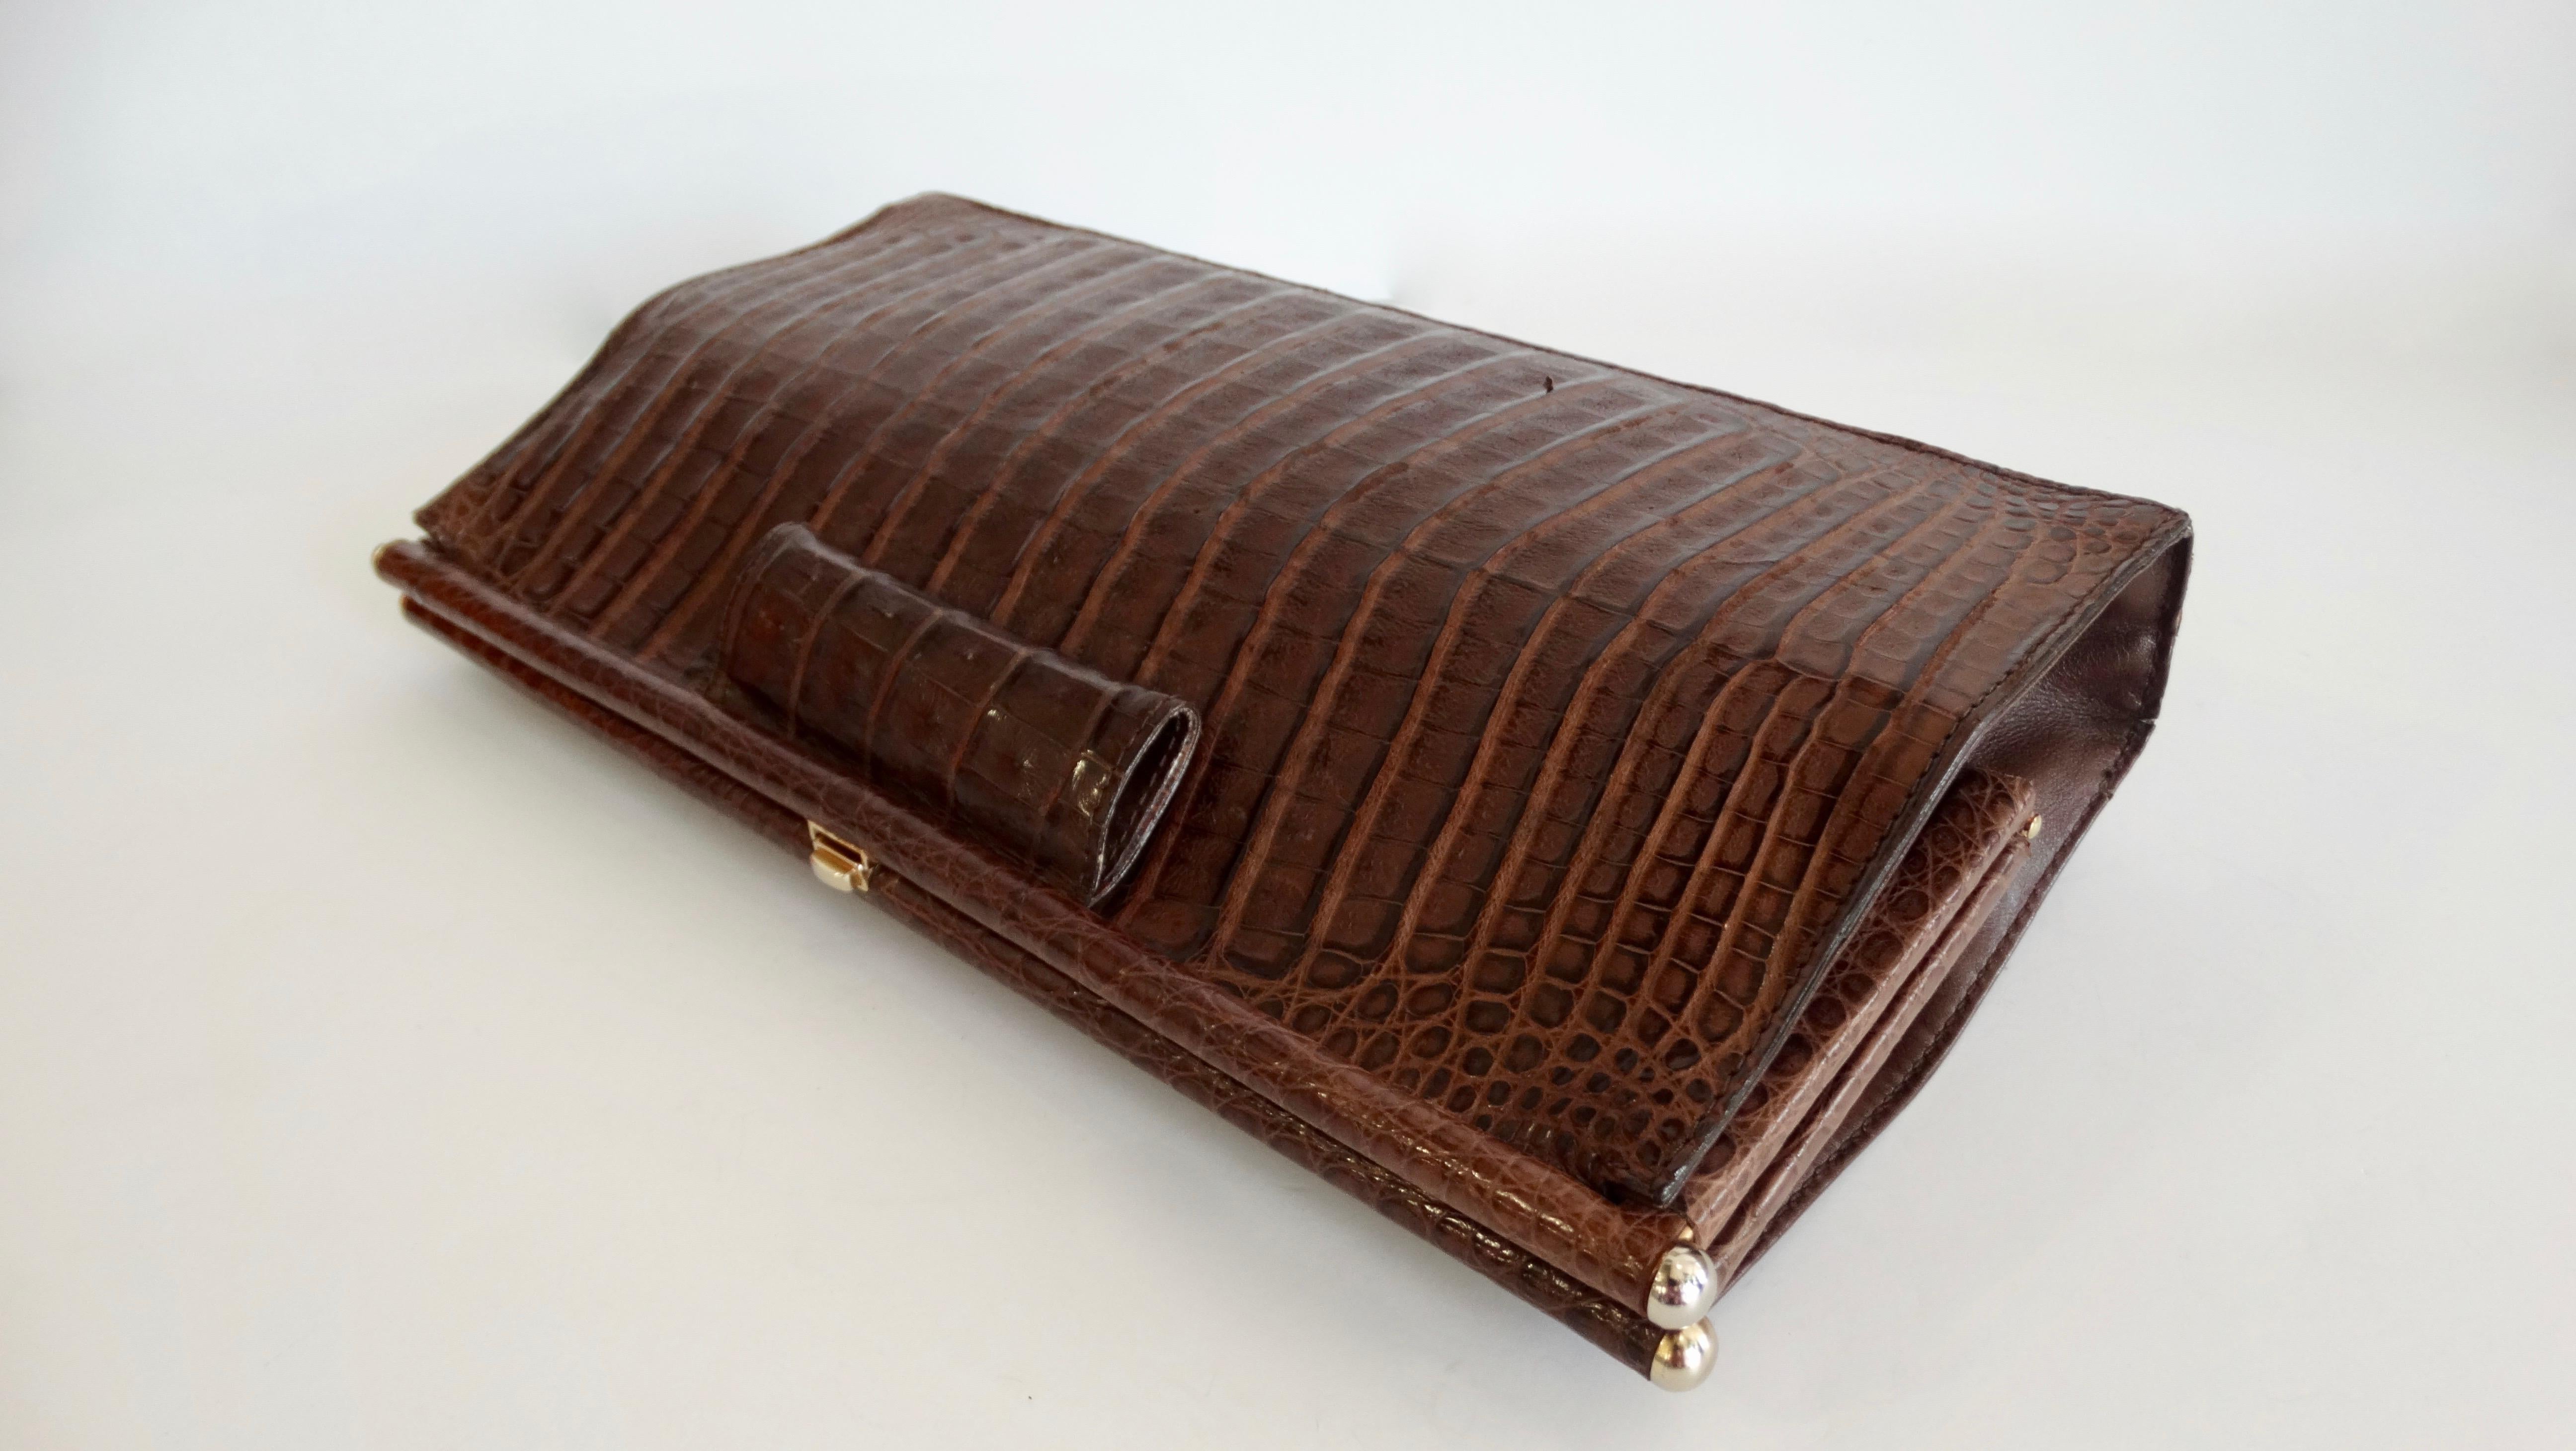 Elevate your purse collection with this Donna Karan clutch! Circa 1980s, this rare clutch is made of genuine caiman crocodile. Features a simple and timeless design and includes a push tap closure. Interior is fully lined in black suede. The perfect